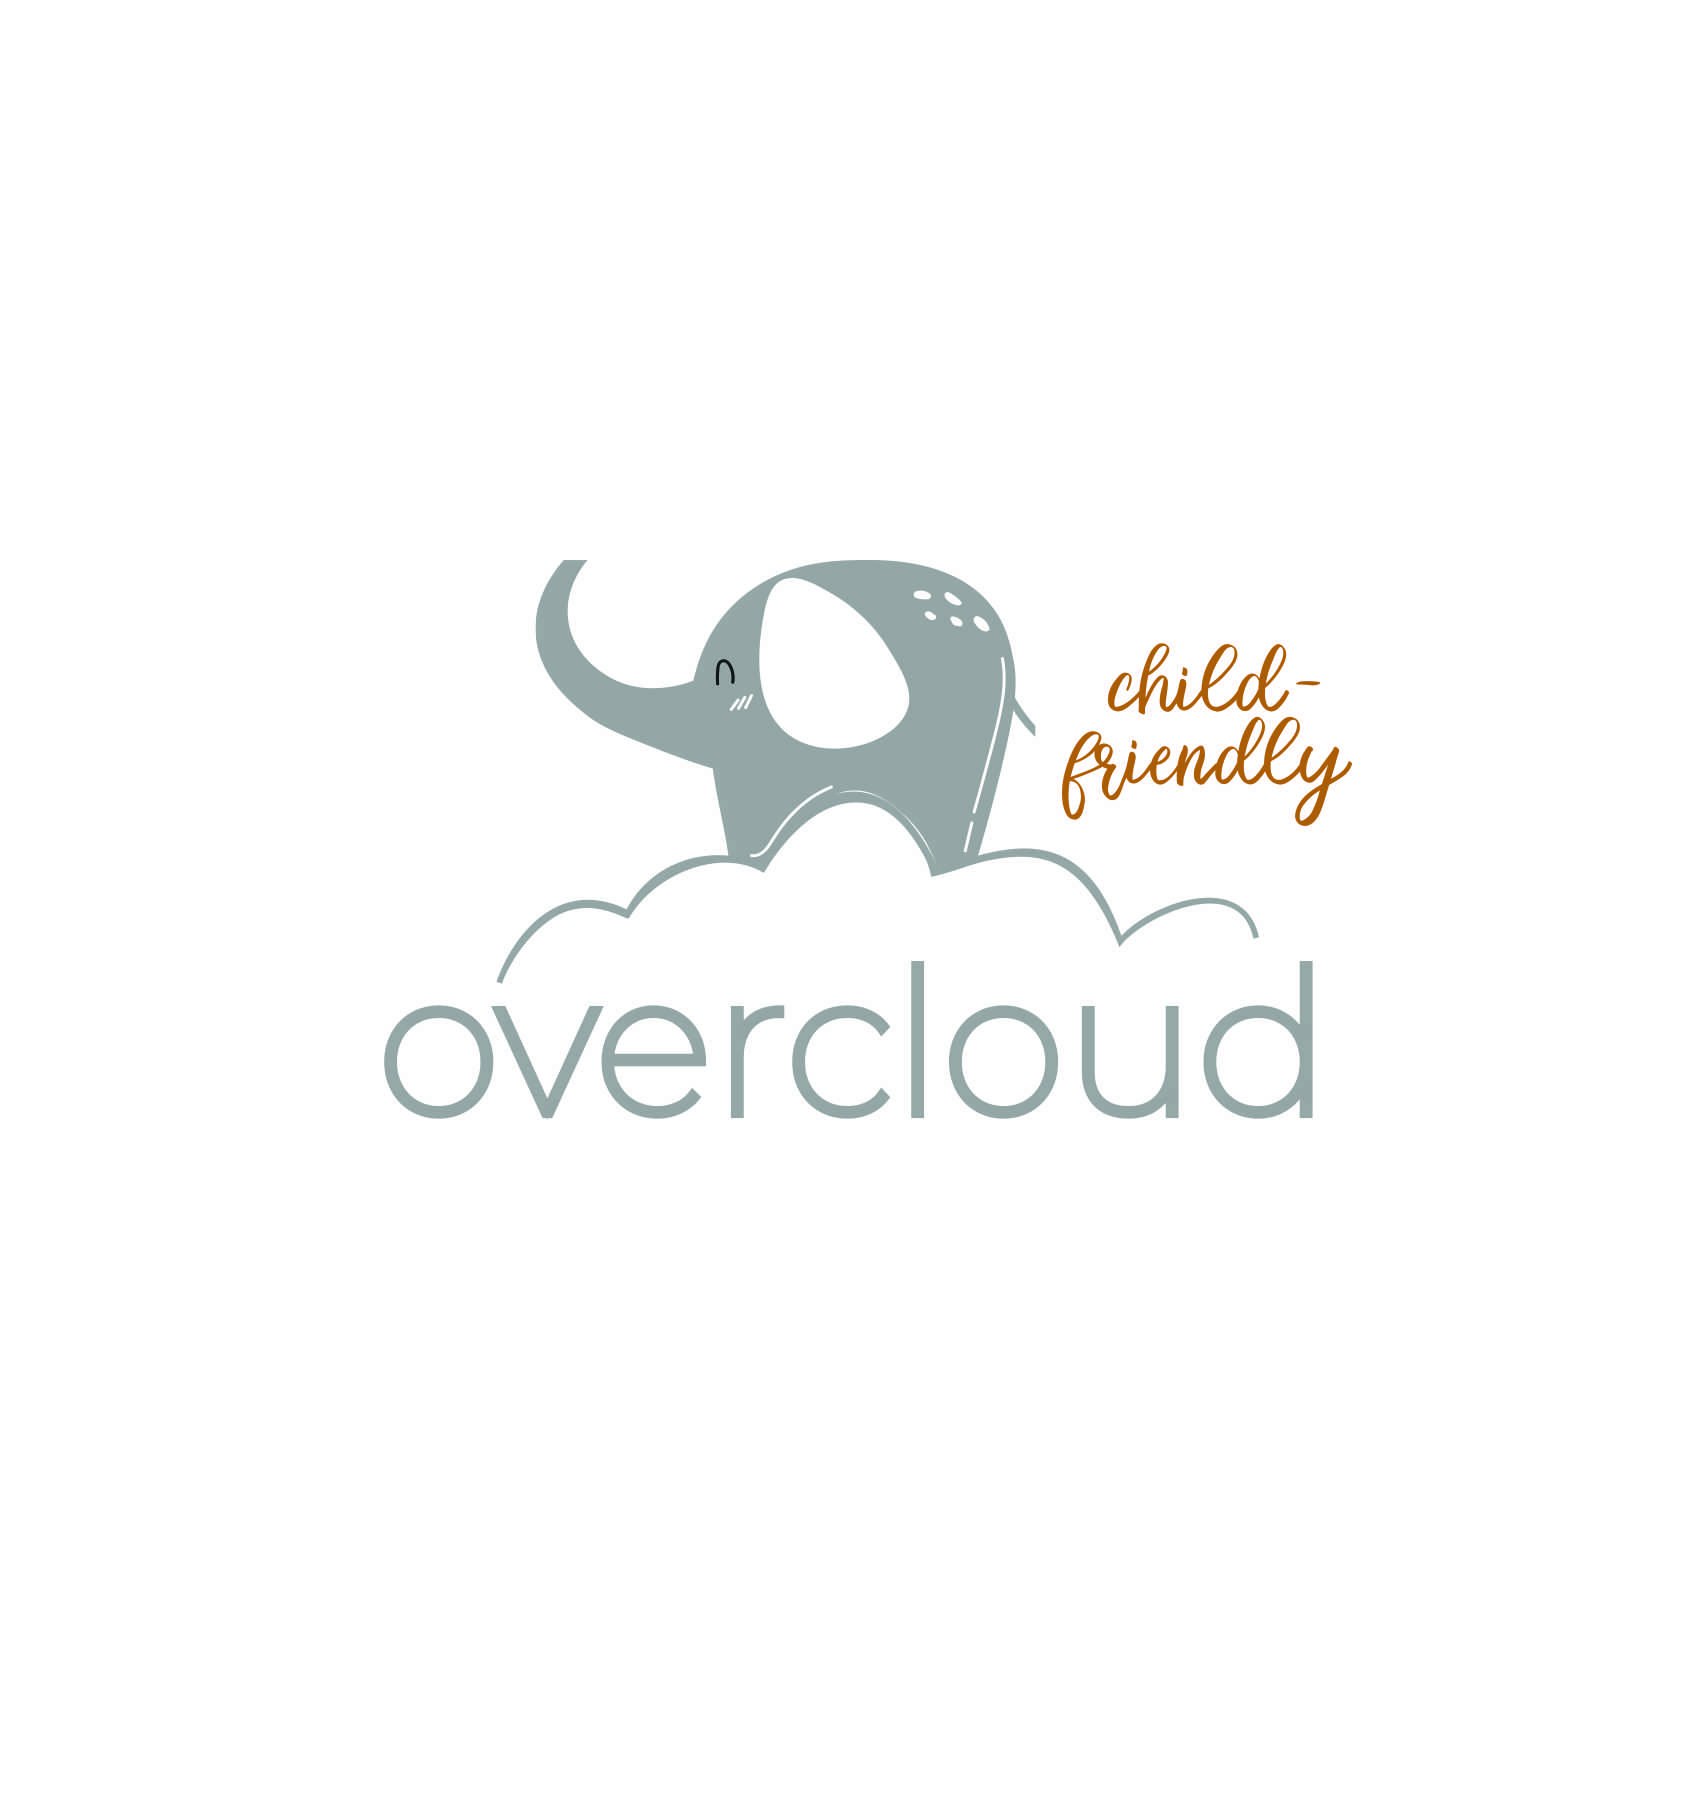 overcloud child-friendly 